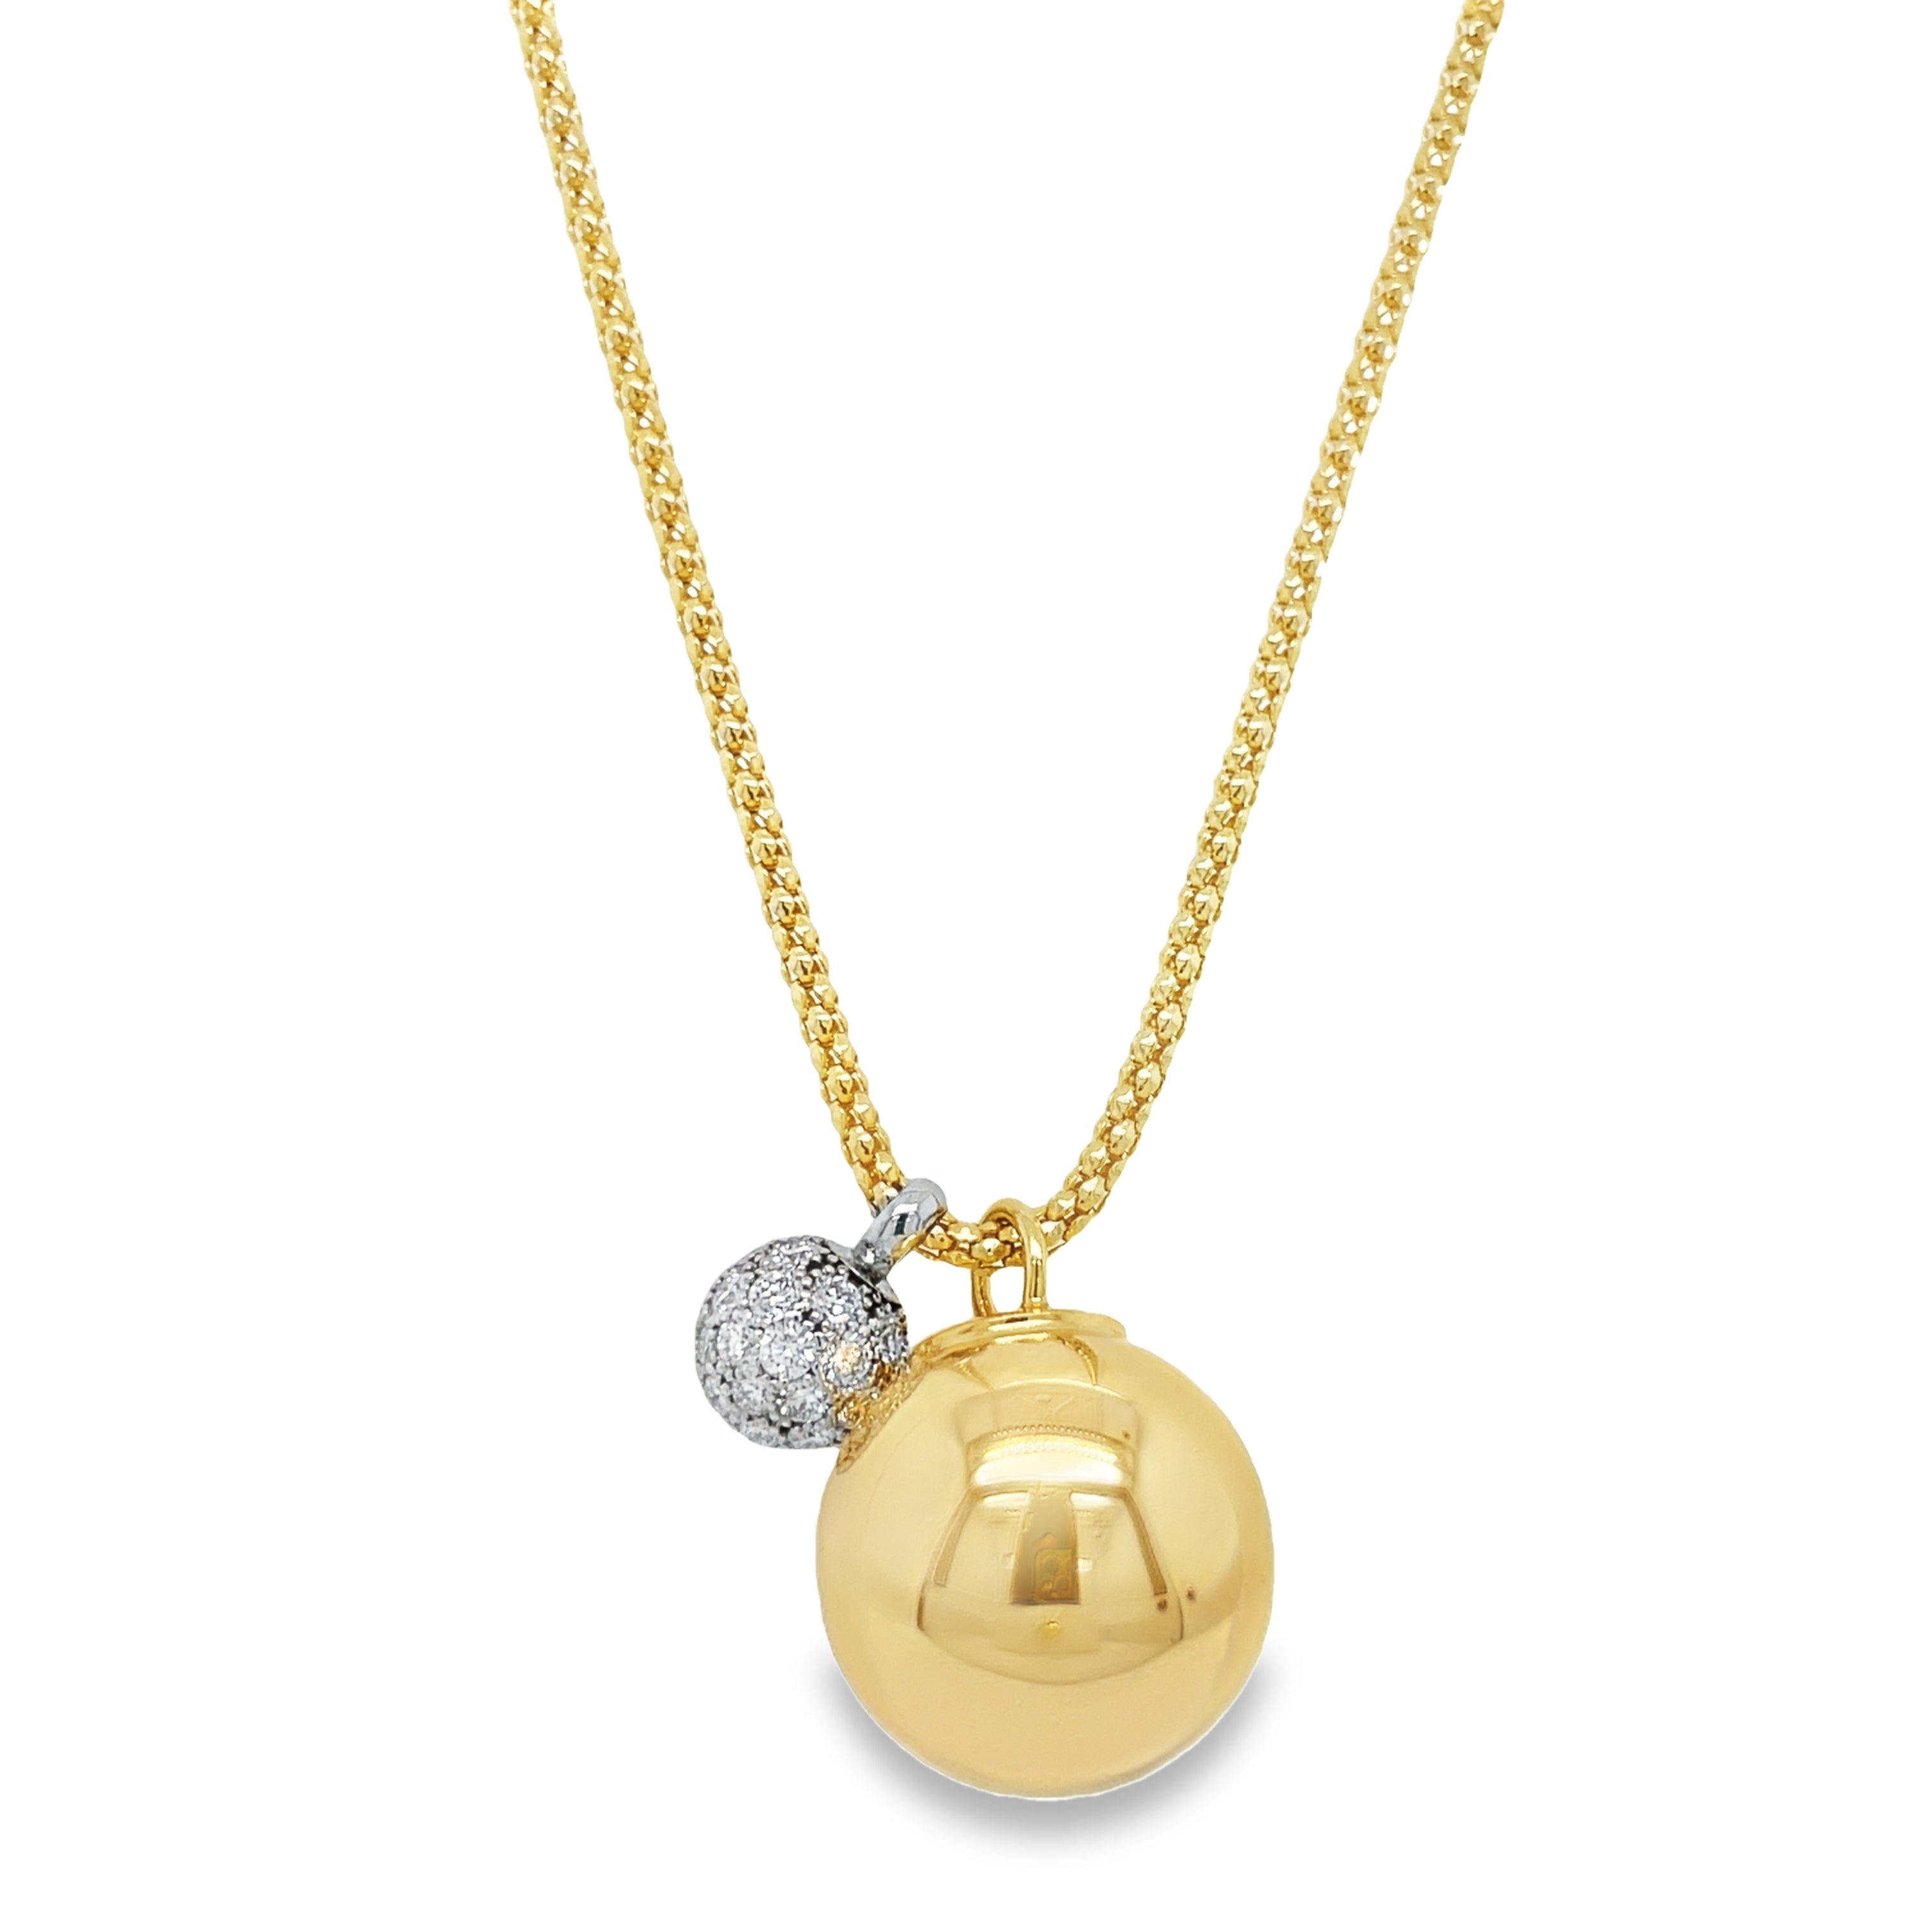 Indulge in pure luxury with our Diamond Ball & Yellow Gold Sphere Mesh Necklace. Crafted with 18k yellow gold, this necklace features a stunning large gold sphere measuring 16.00 mm and a dazzling diamond pave ball totaling 1.16 cts at 8.00 mm. The 22" mesh chain is secured with a lobster clasp for a worry-free wear. Elevate any outfit with this sophisticated and elegant piece!